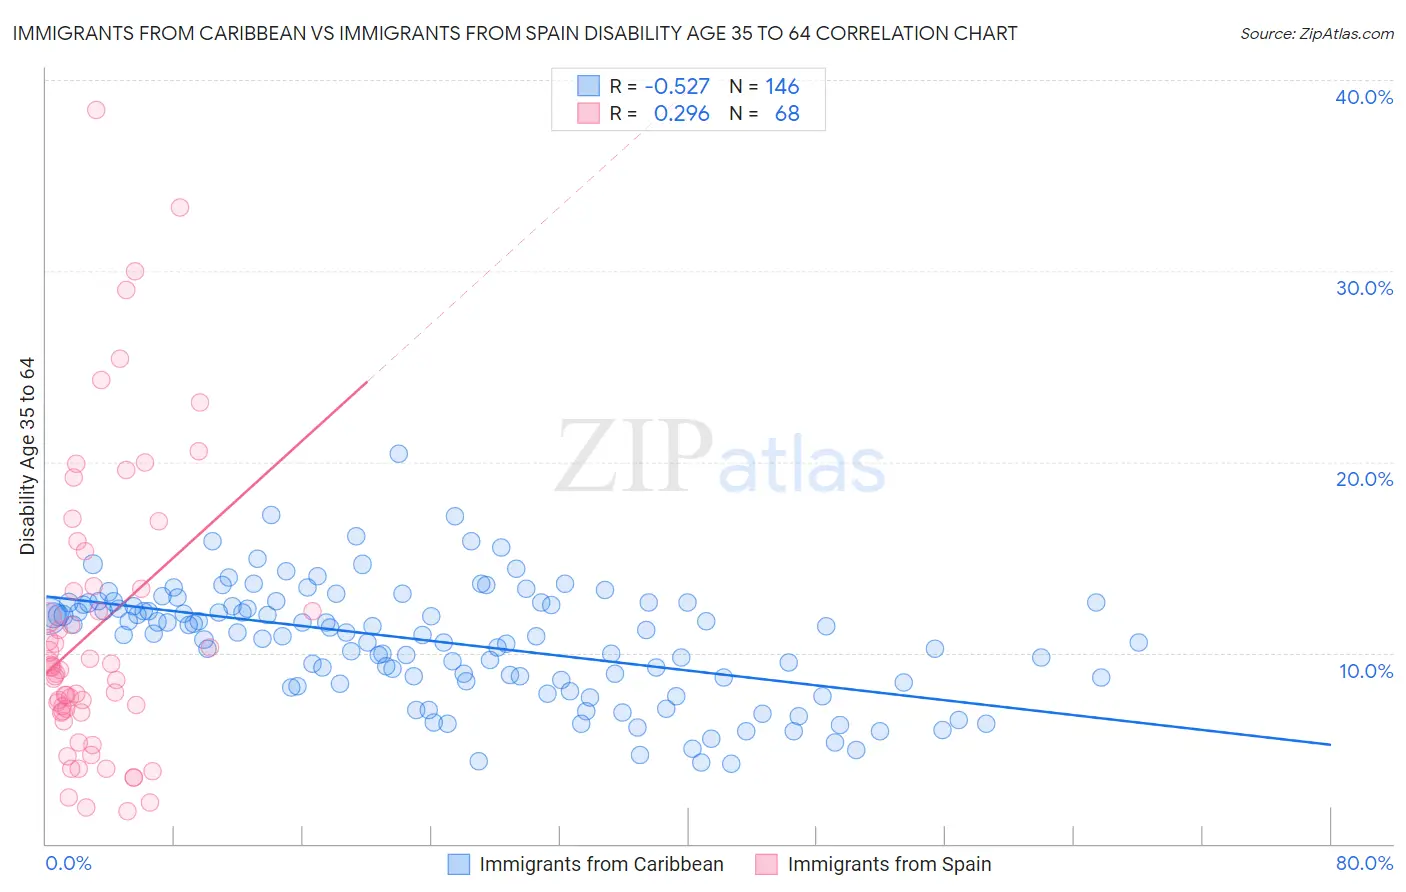 Immigrants from Caribbean vs Immigrants from Spain Disability Age 35 to 64